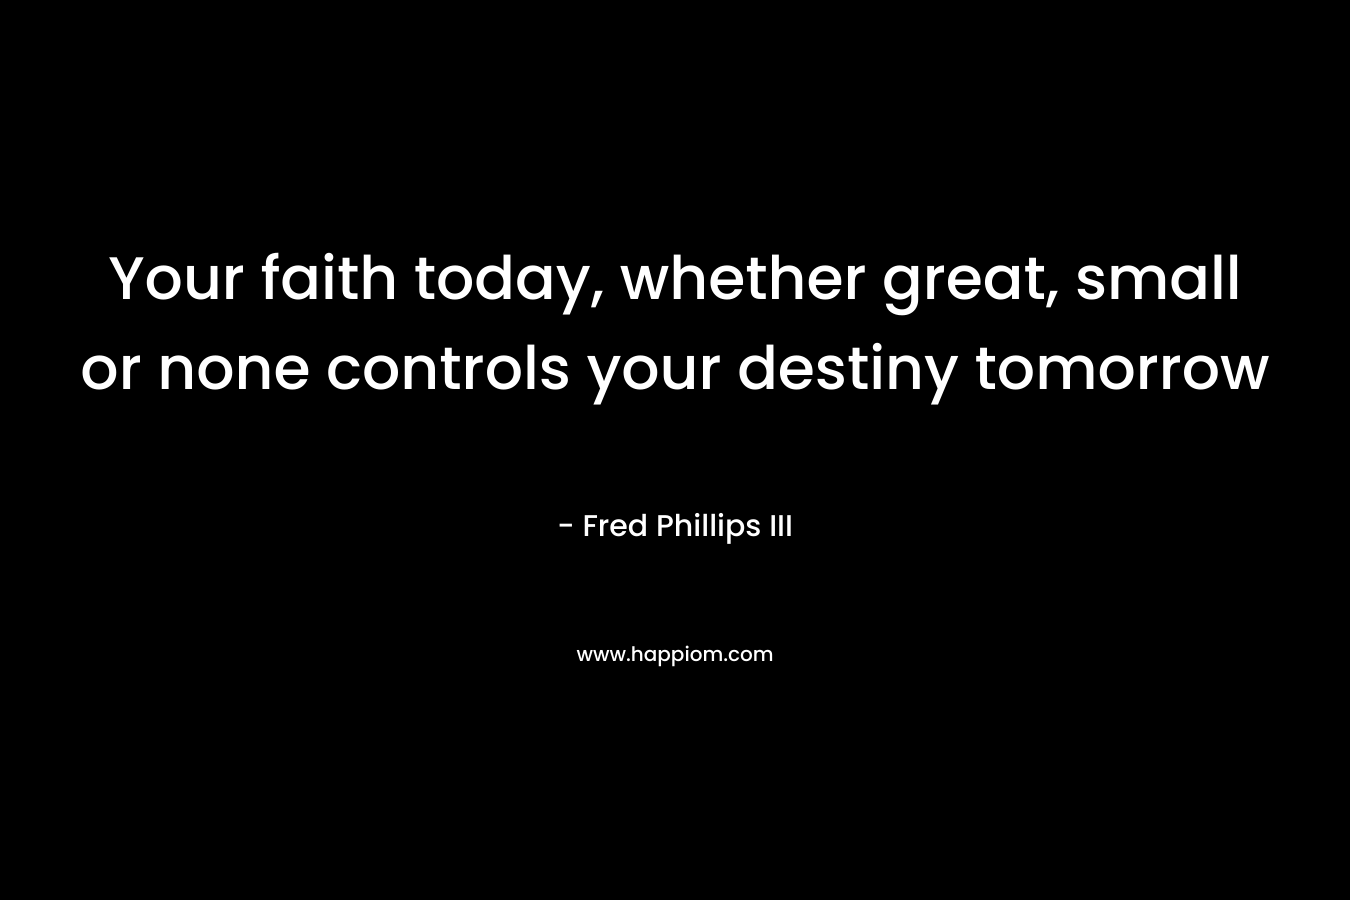 Your faith today, whether great, small or none controls your destiny tomorrow